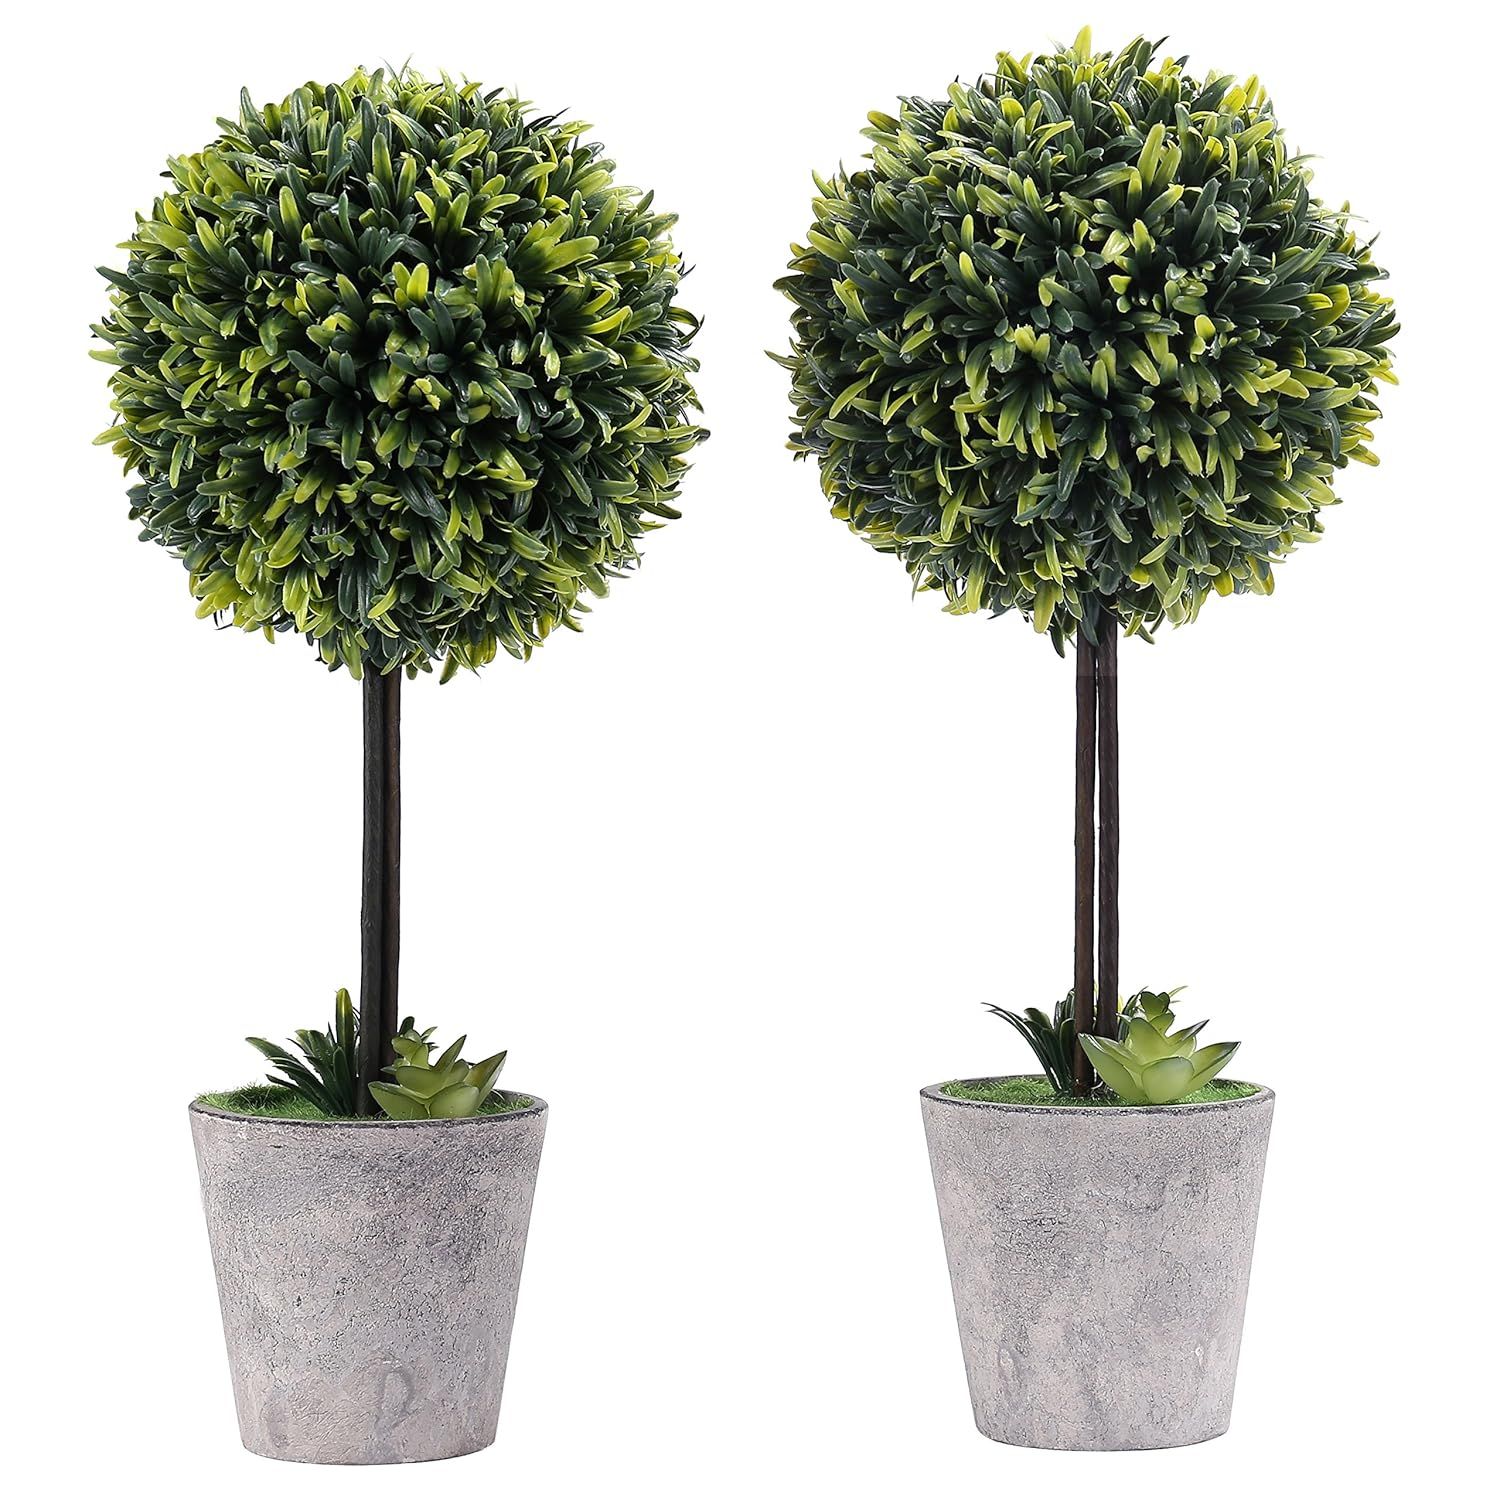 MyGift Artificial Boxwood Topiary Tree in Modern Gray Pulp Planter, Set of 2 | Amazon (US)